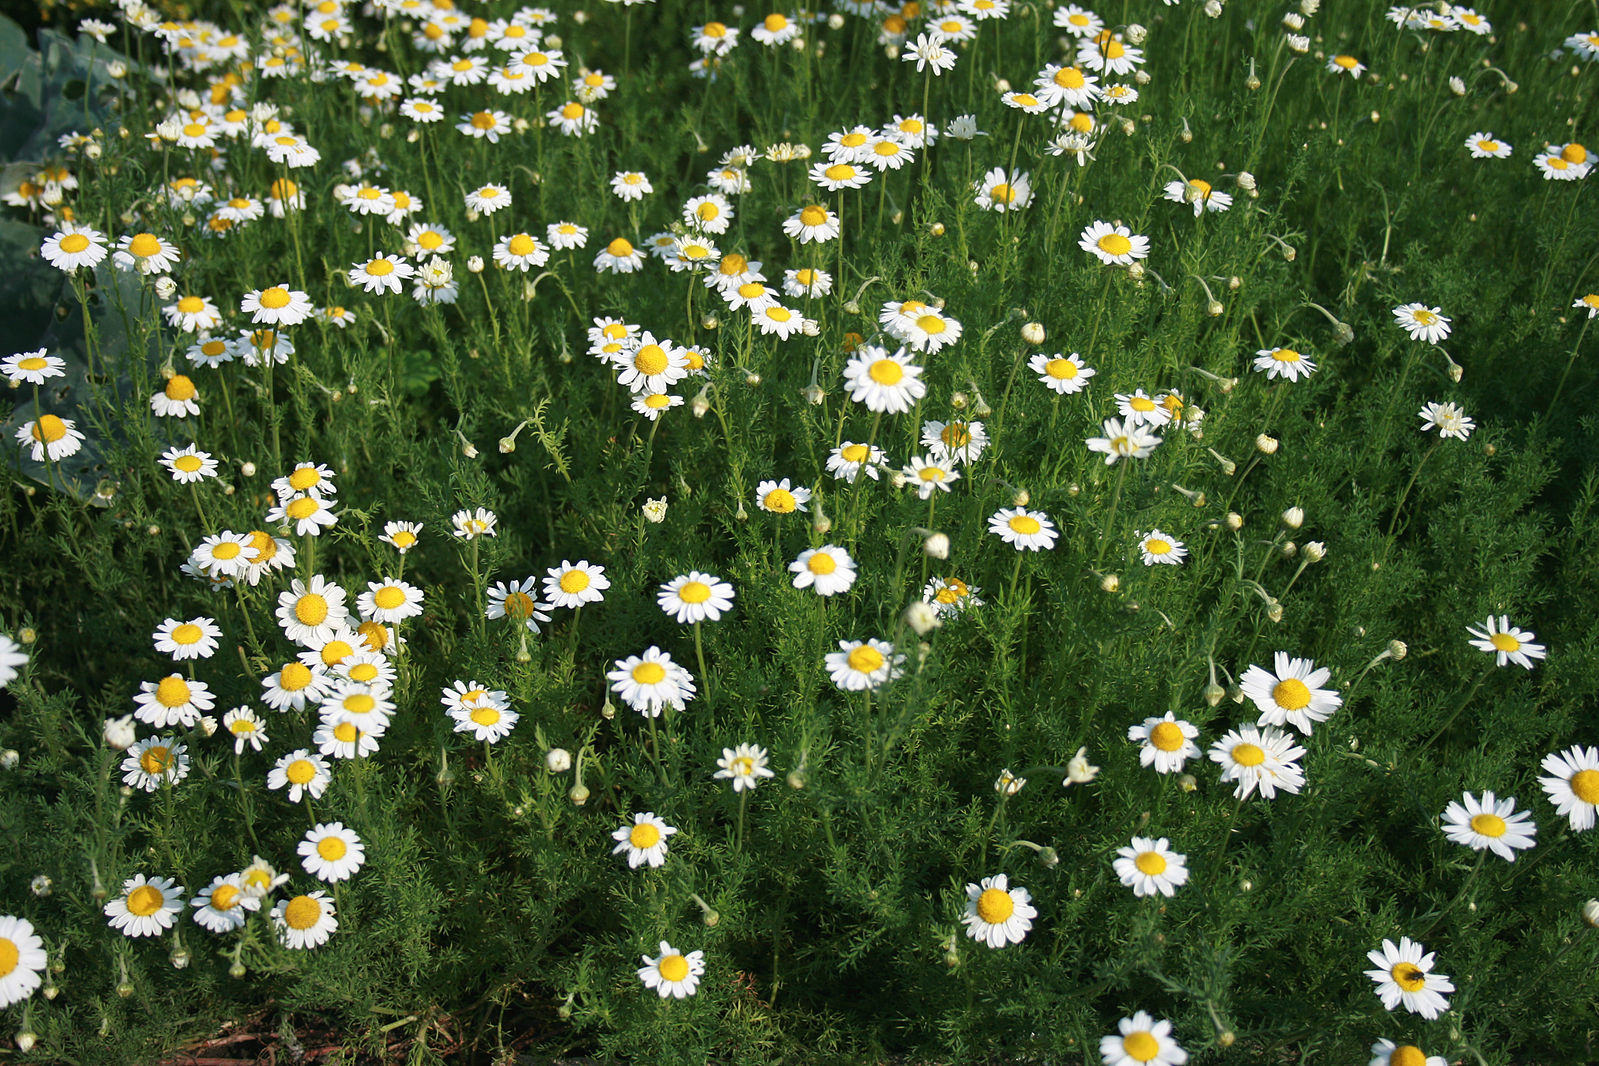 Finely divided, green leaves and white, daisy-like flowers with a yellow centre of chamomile plants.